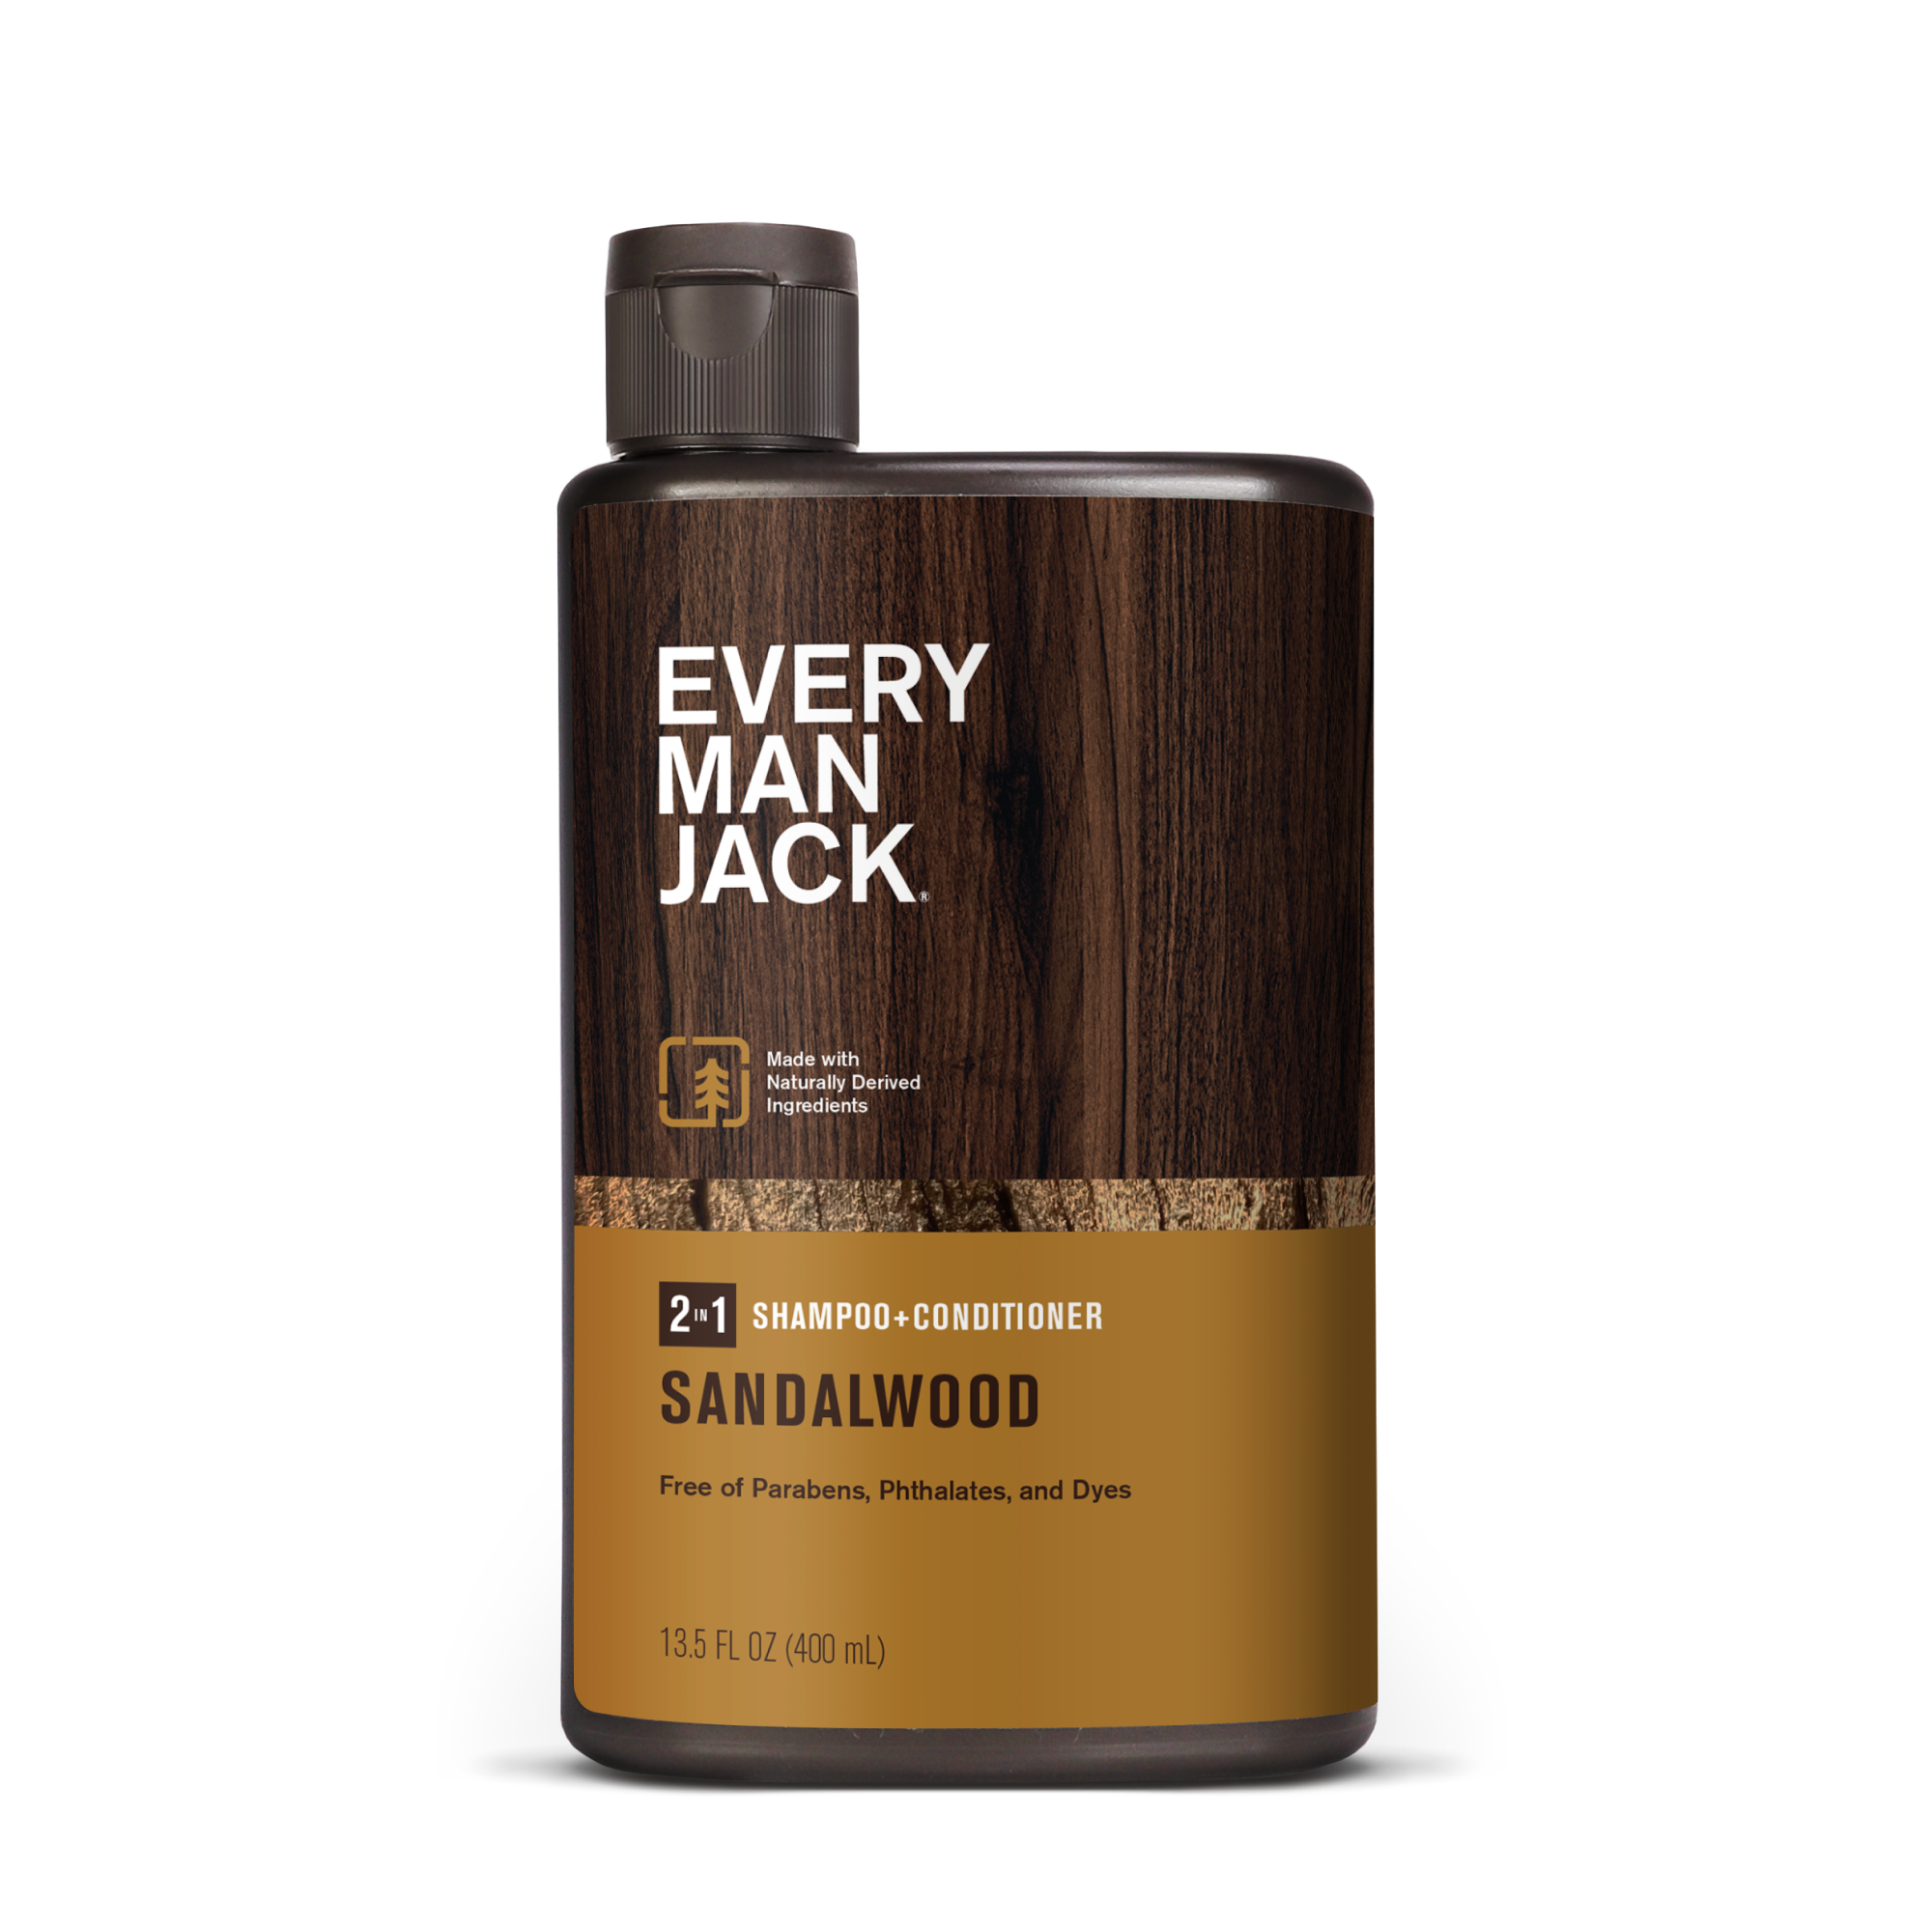 2-in-1 Shampoo + Conditioner Standard | Every Man Jack